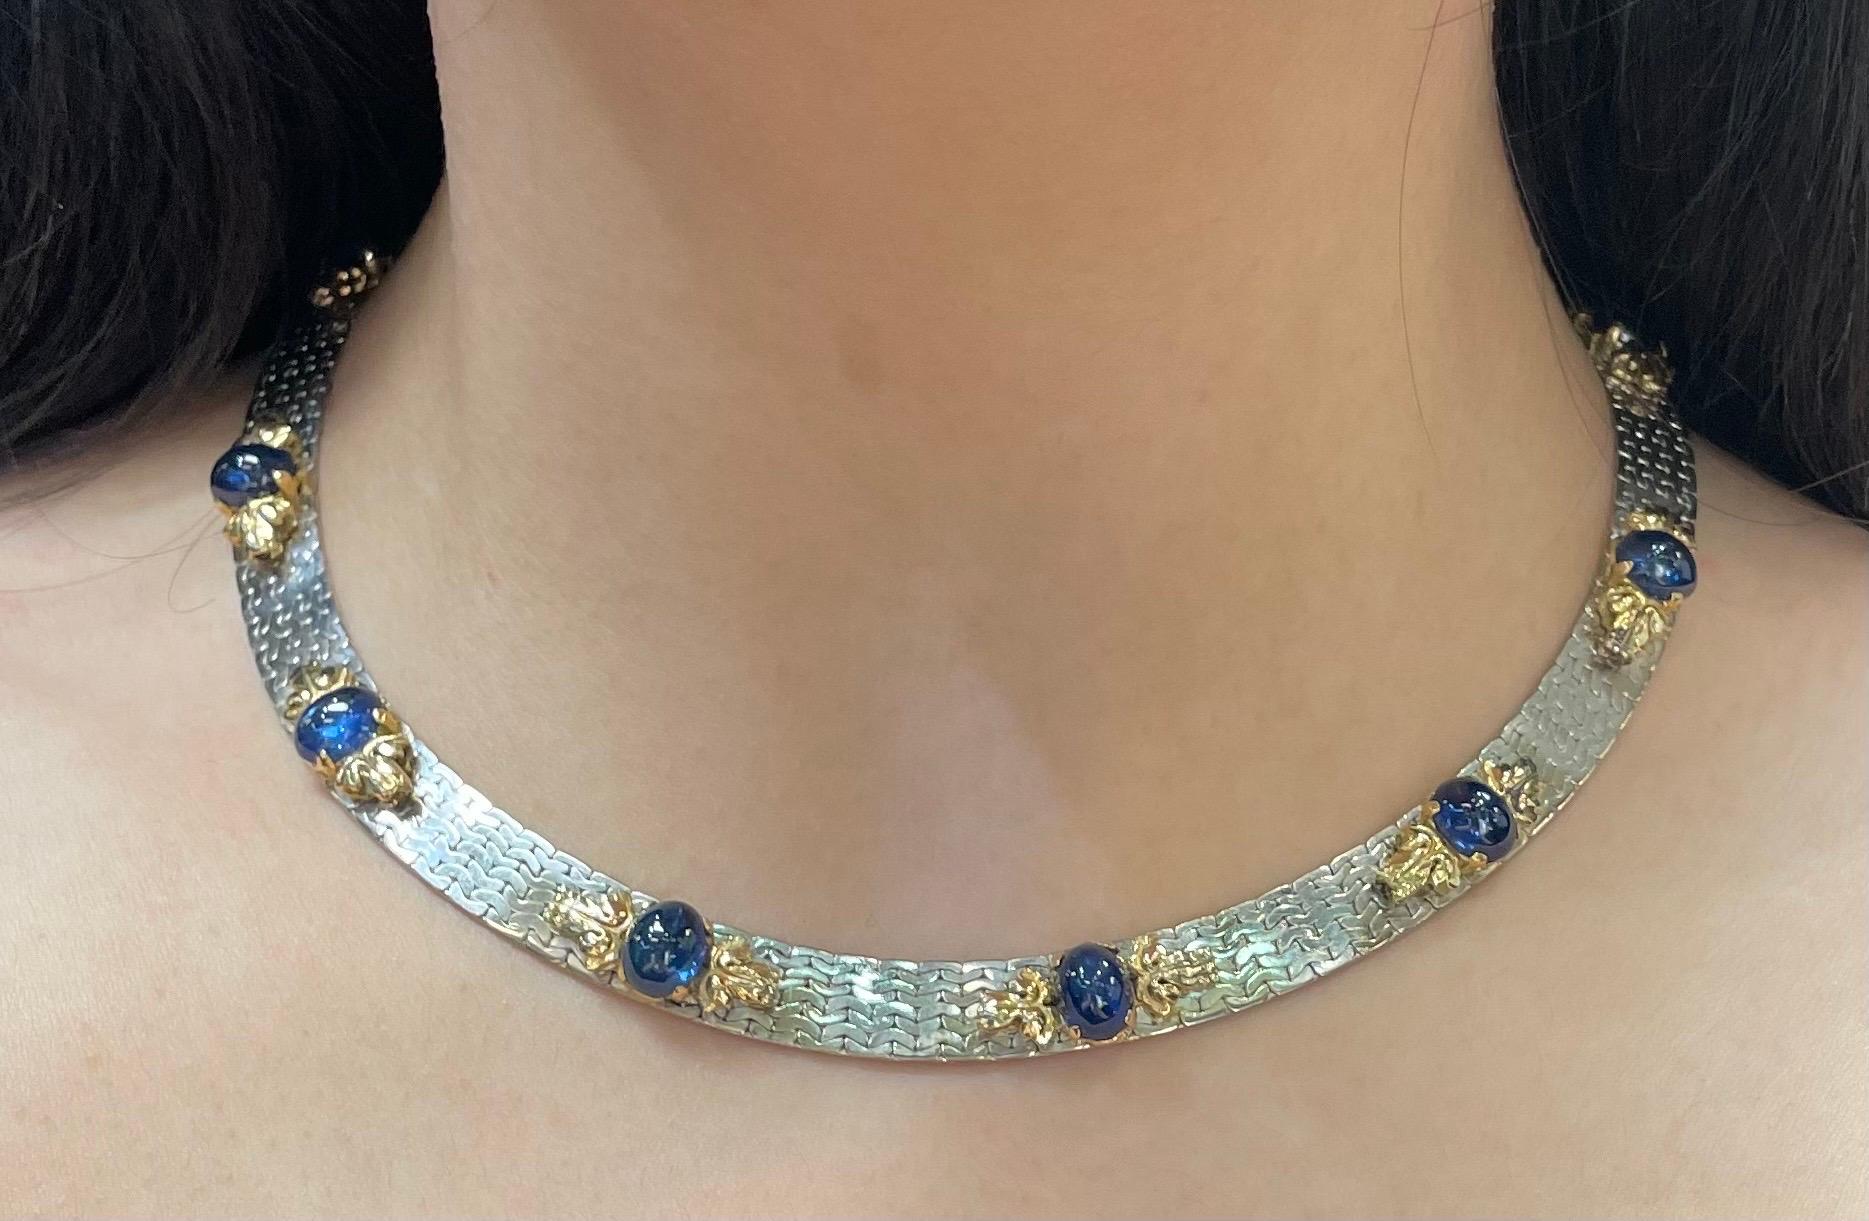 Cabochon Sapphire Necklace

A white and yellow gold necklace set with eight cabochon sapphires. 

Approximate Sapphire weight: 23.12 carats
Approximate Length: 15